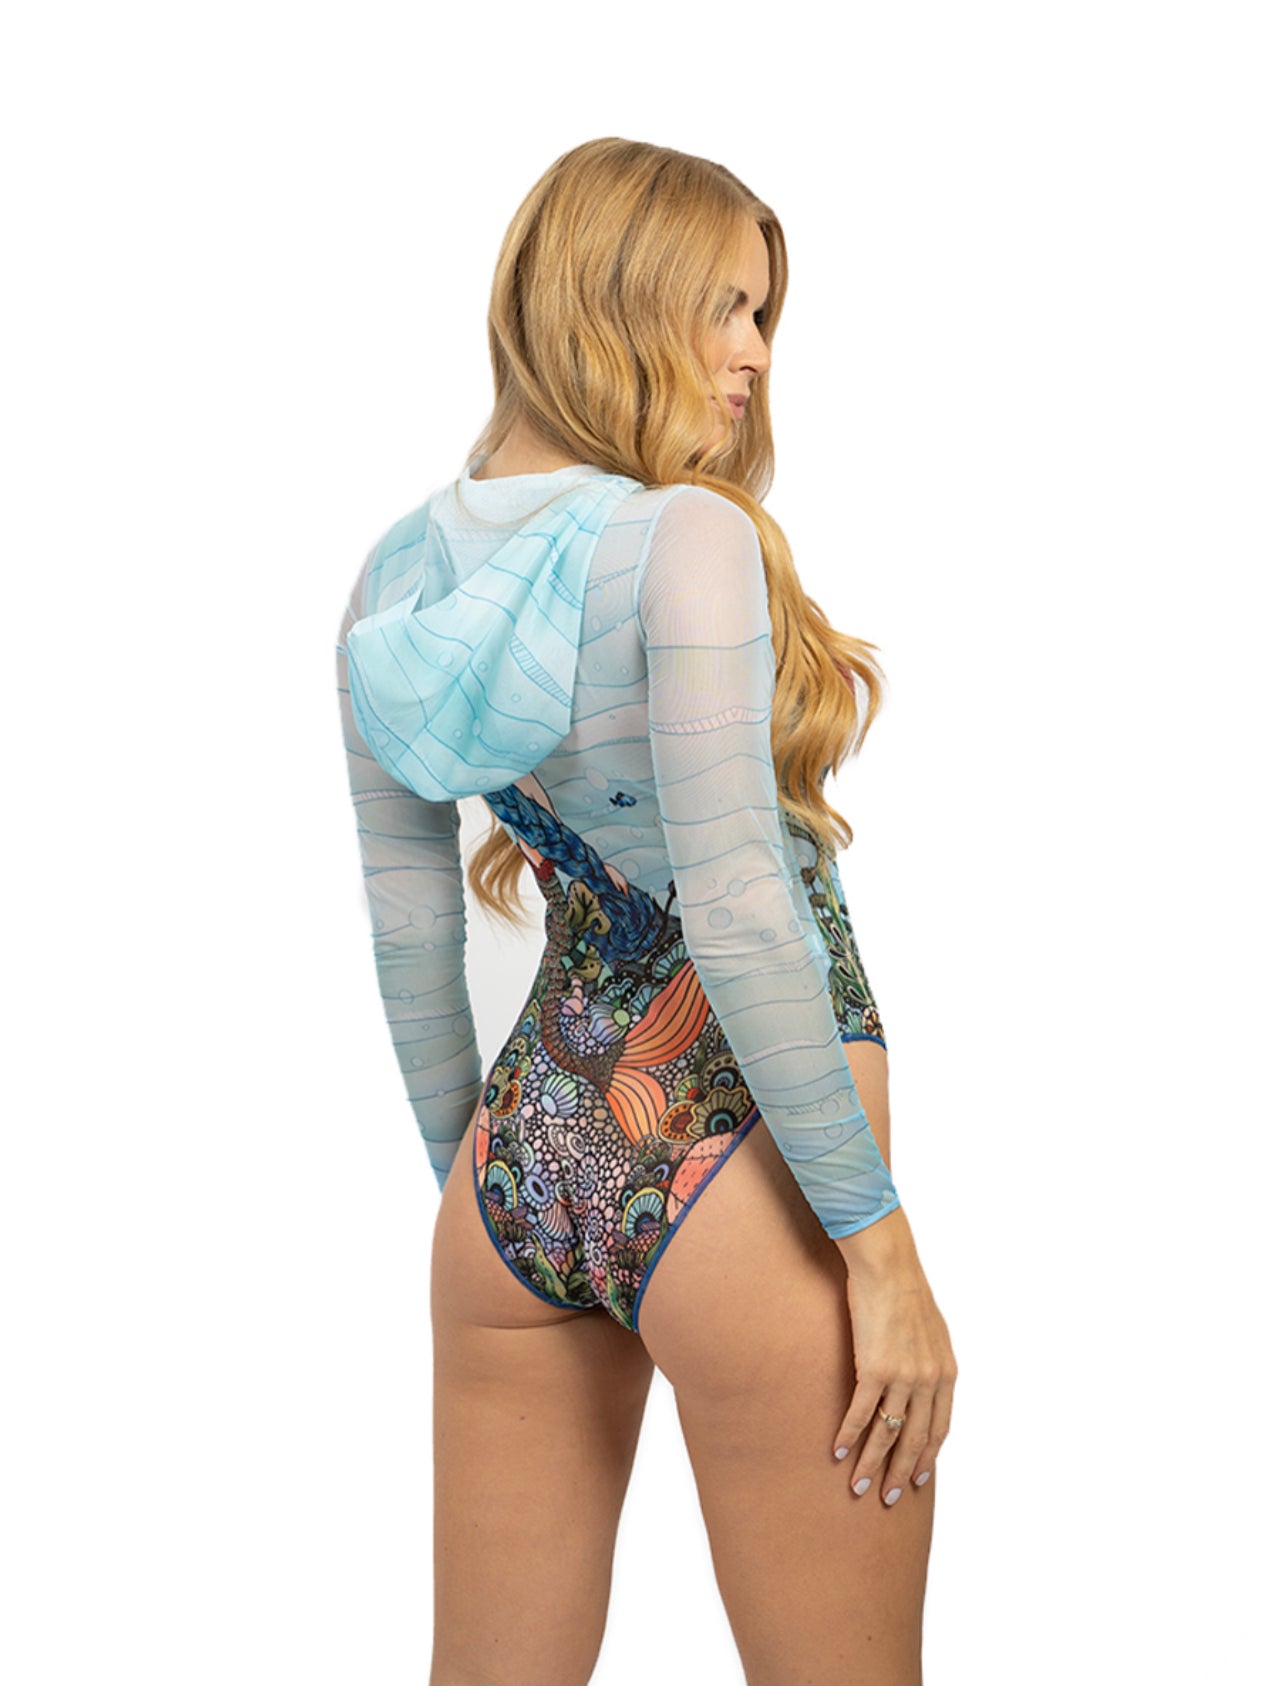 Explore our range of sustainable tan-through swimsuits with a charming mermaid print. This swimsuit offers SPF35 protection and comes with a stylish hood and lace detail for a touch of elegance.